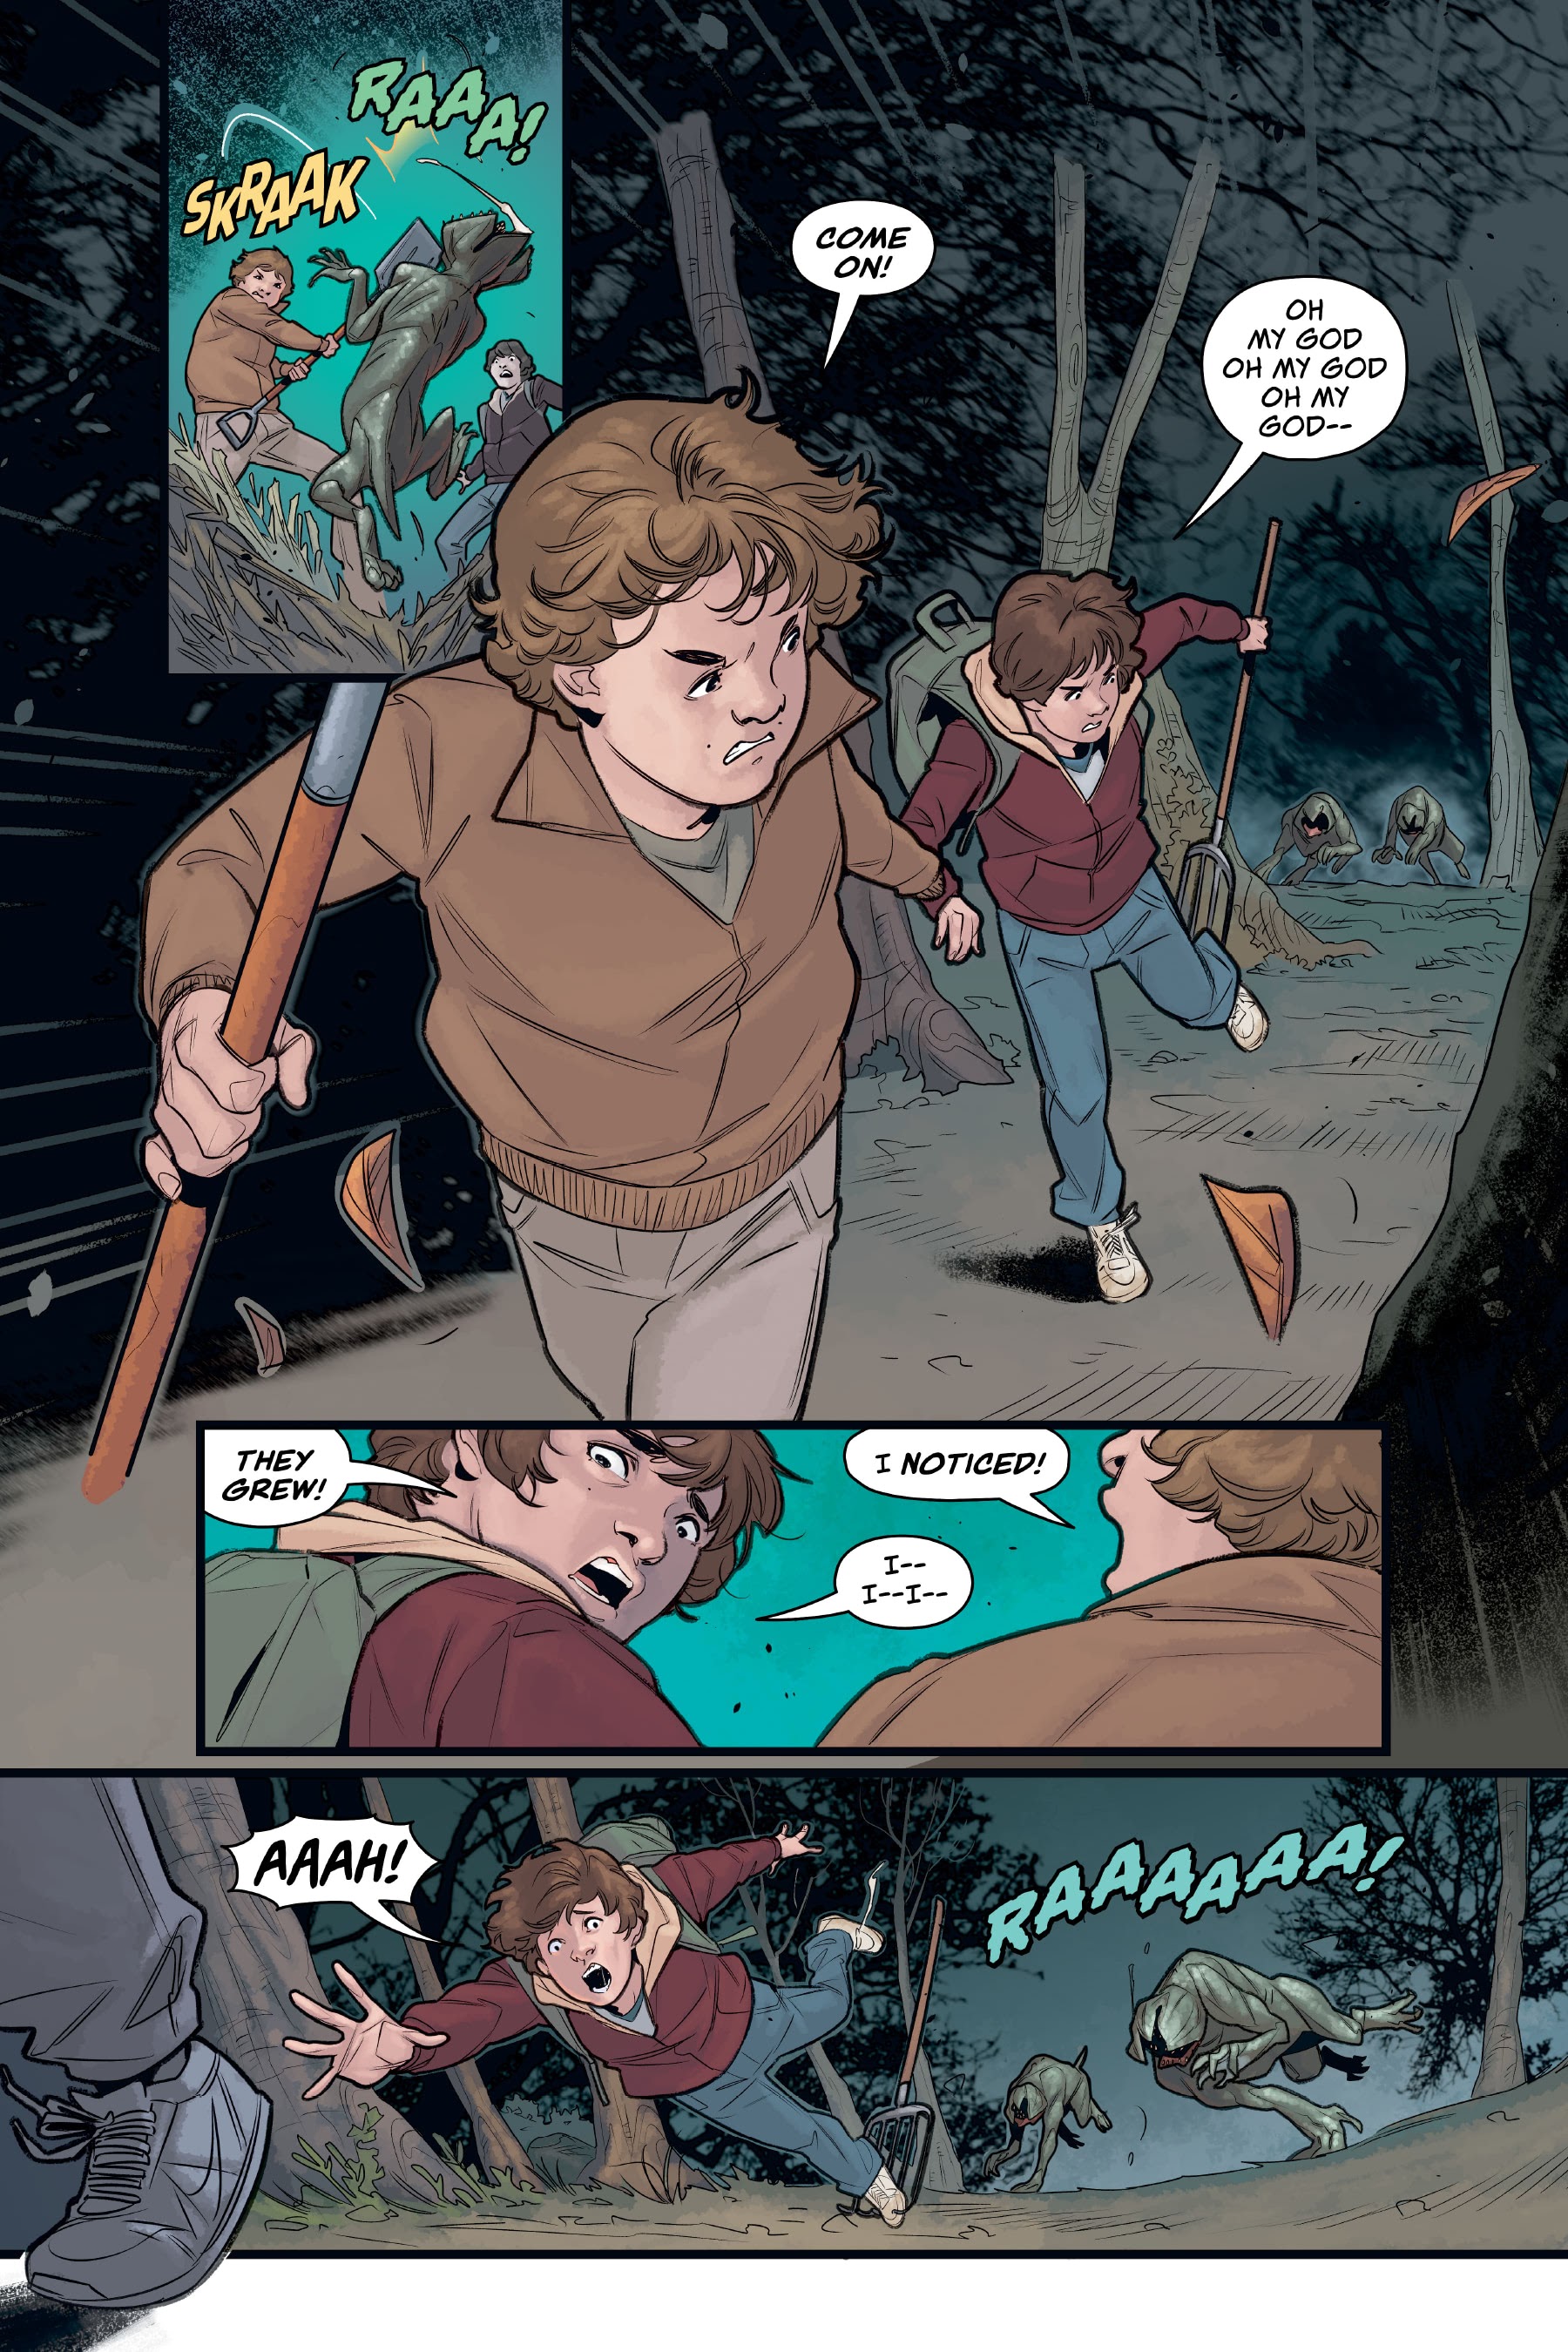 Read online Stranger Things: The Bully comic -  Issue # TPB - 52